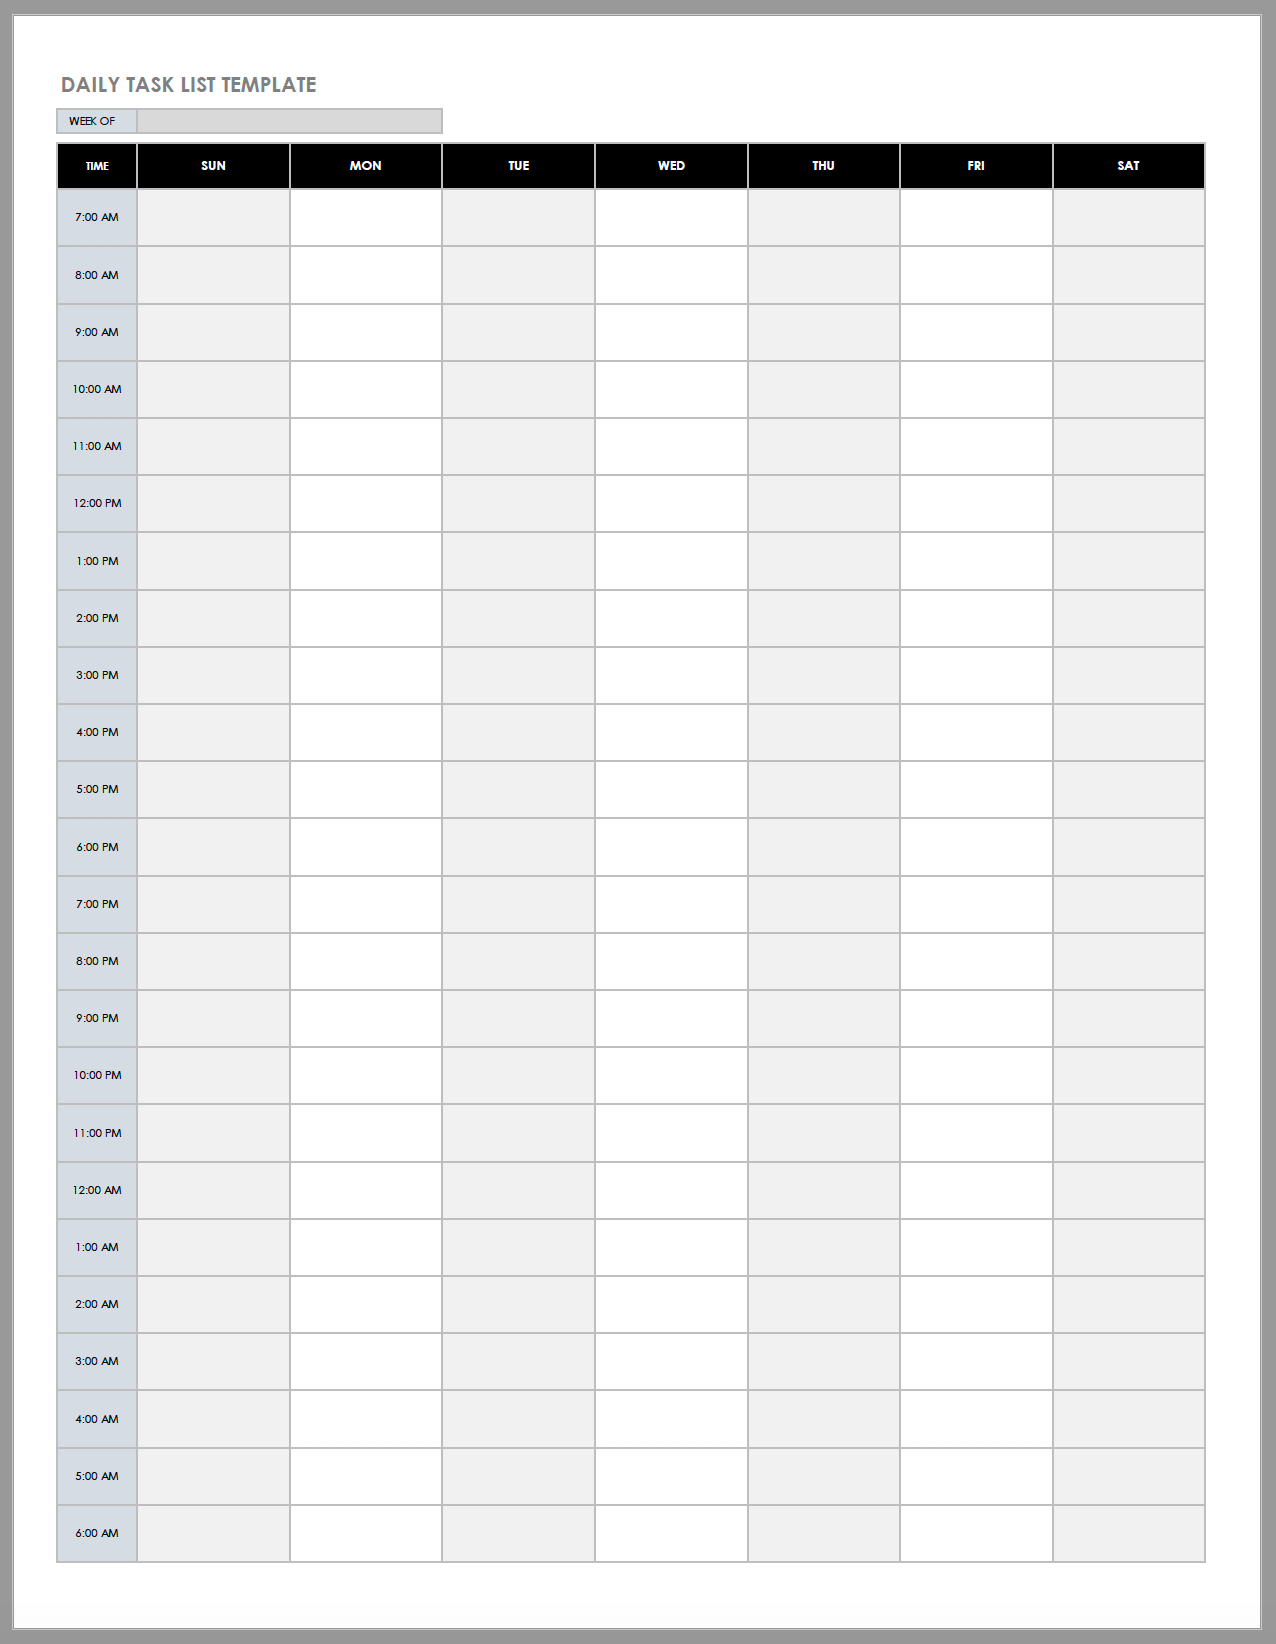 Free Daily Work Schedule Templates  Smartsheet For Employee Daily Task Checklist Template Pertaining To Employee Daily Task Checklist Template